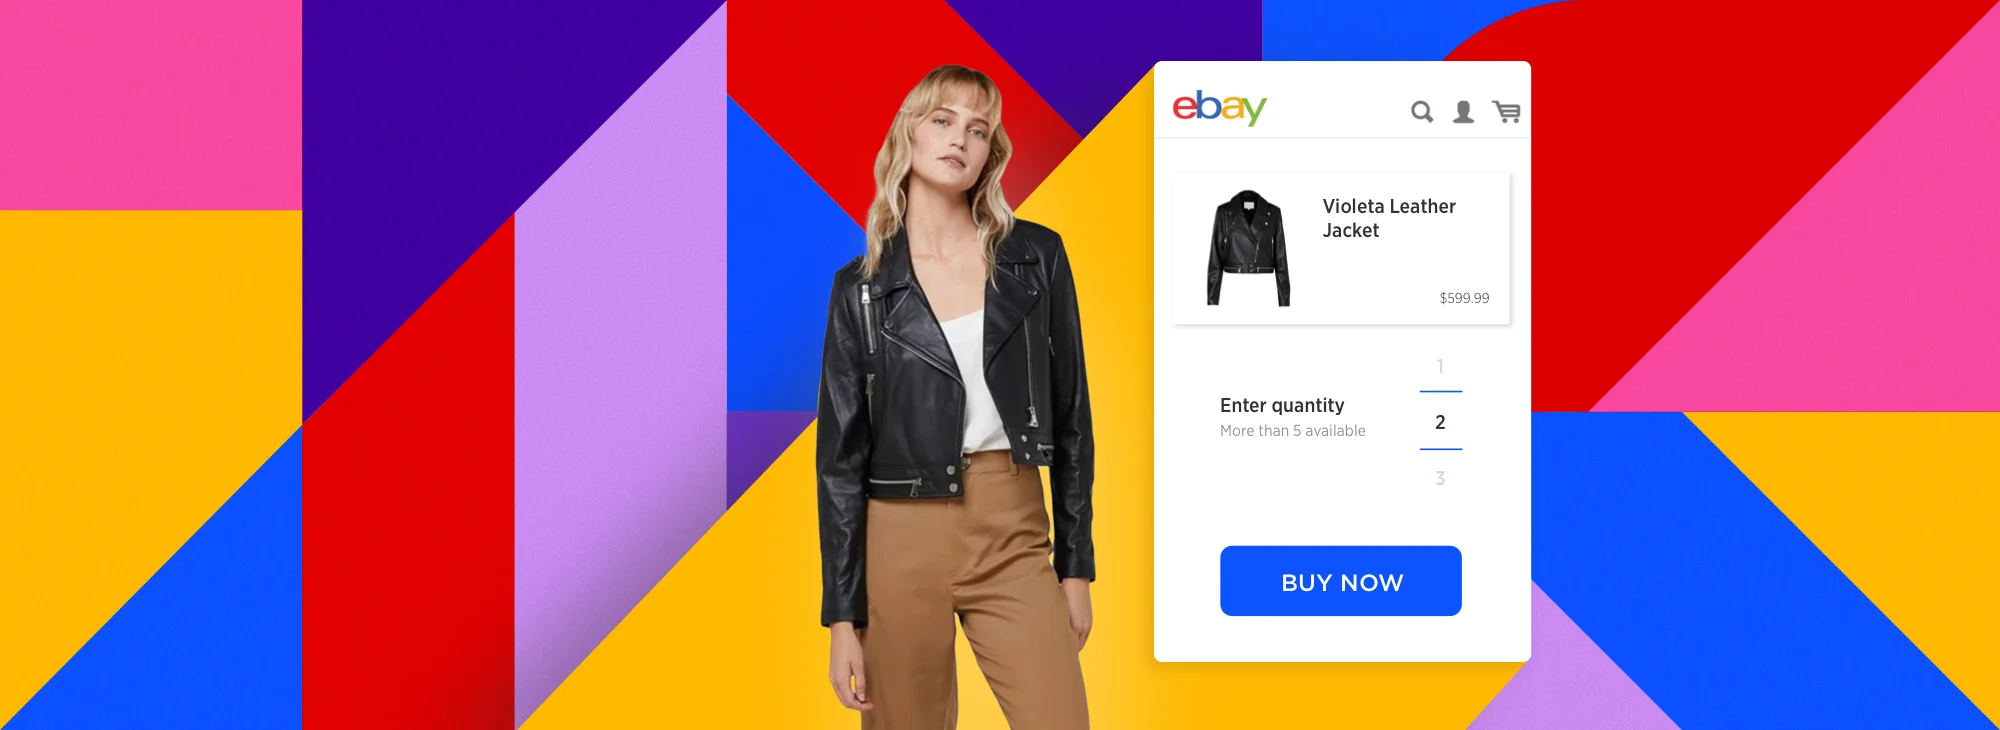 https://cms-wp.bigcommerce.com/wp-content/uploads/2019/10/2019-August-Content-Blog-Headers-Batch-1-Guide-for-How-To-Sell-On-eBay-4858-MT-Copy@1x.png